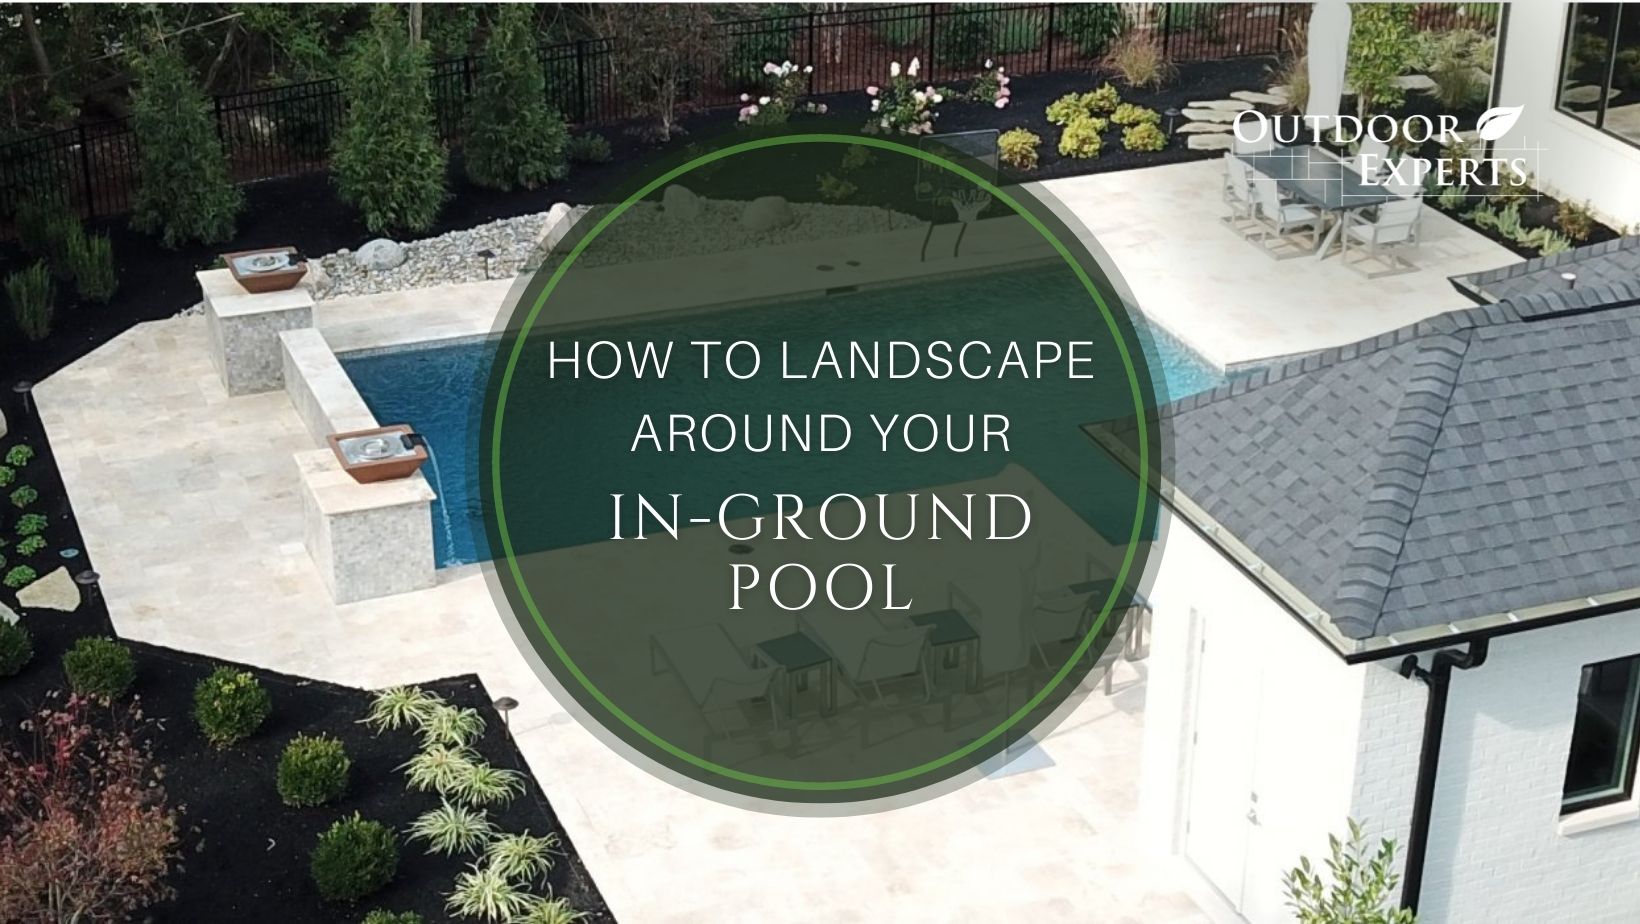 In-Ground Pool for your outdoor living space